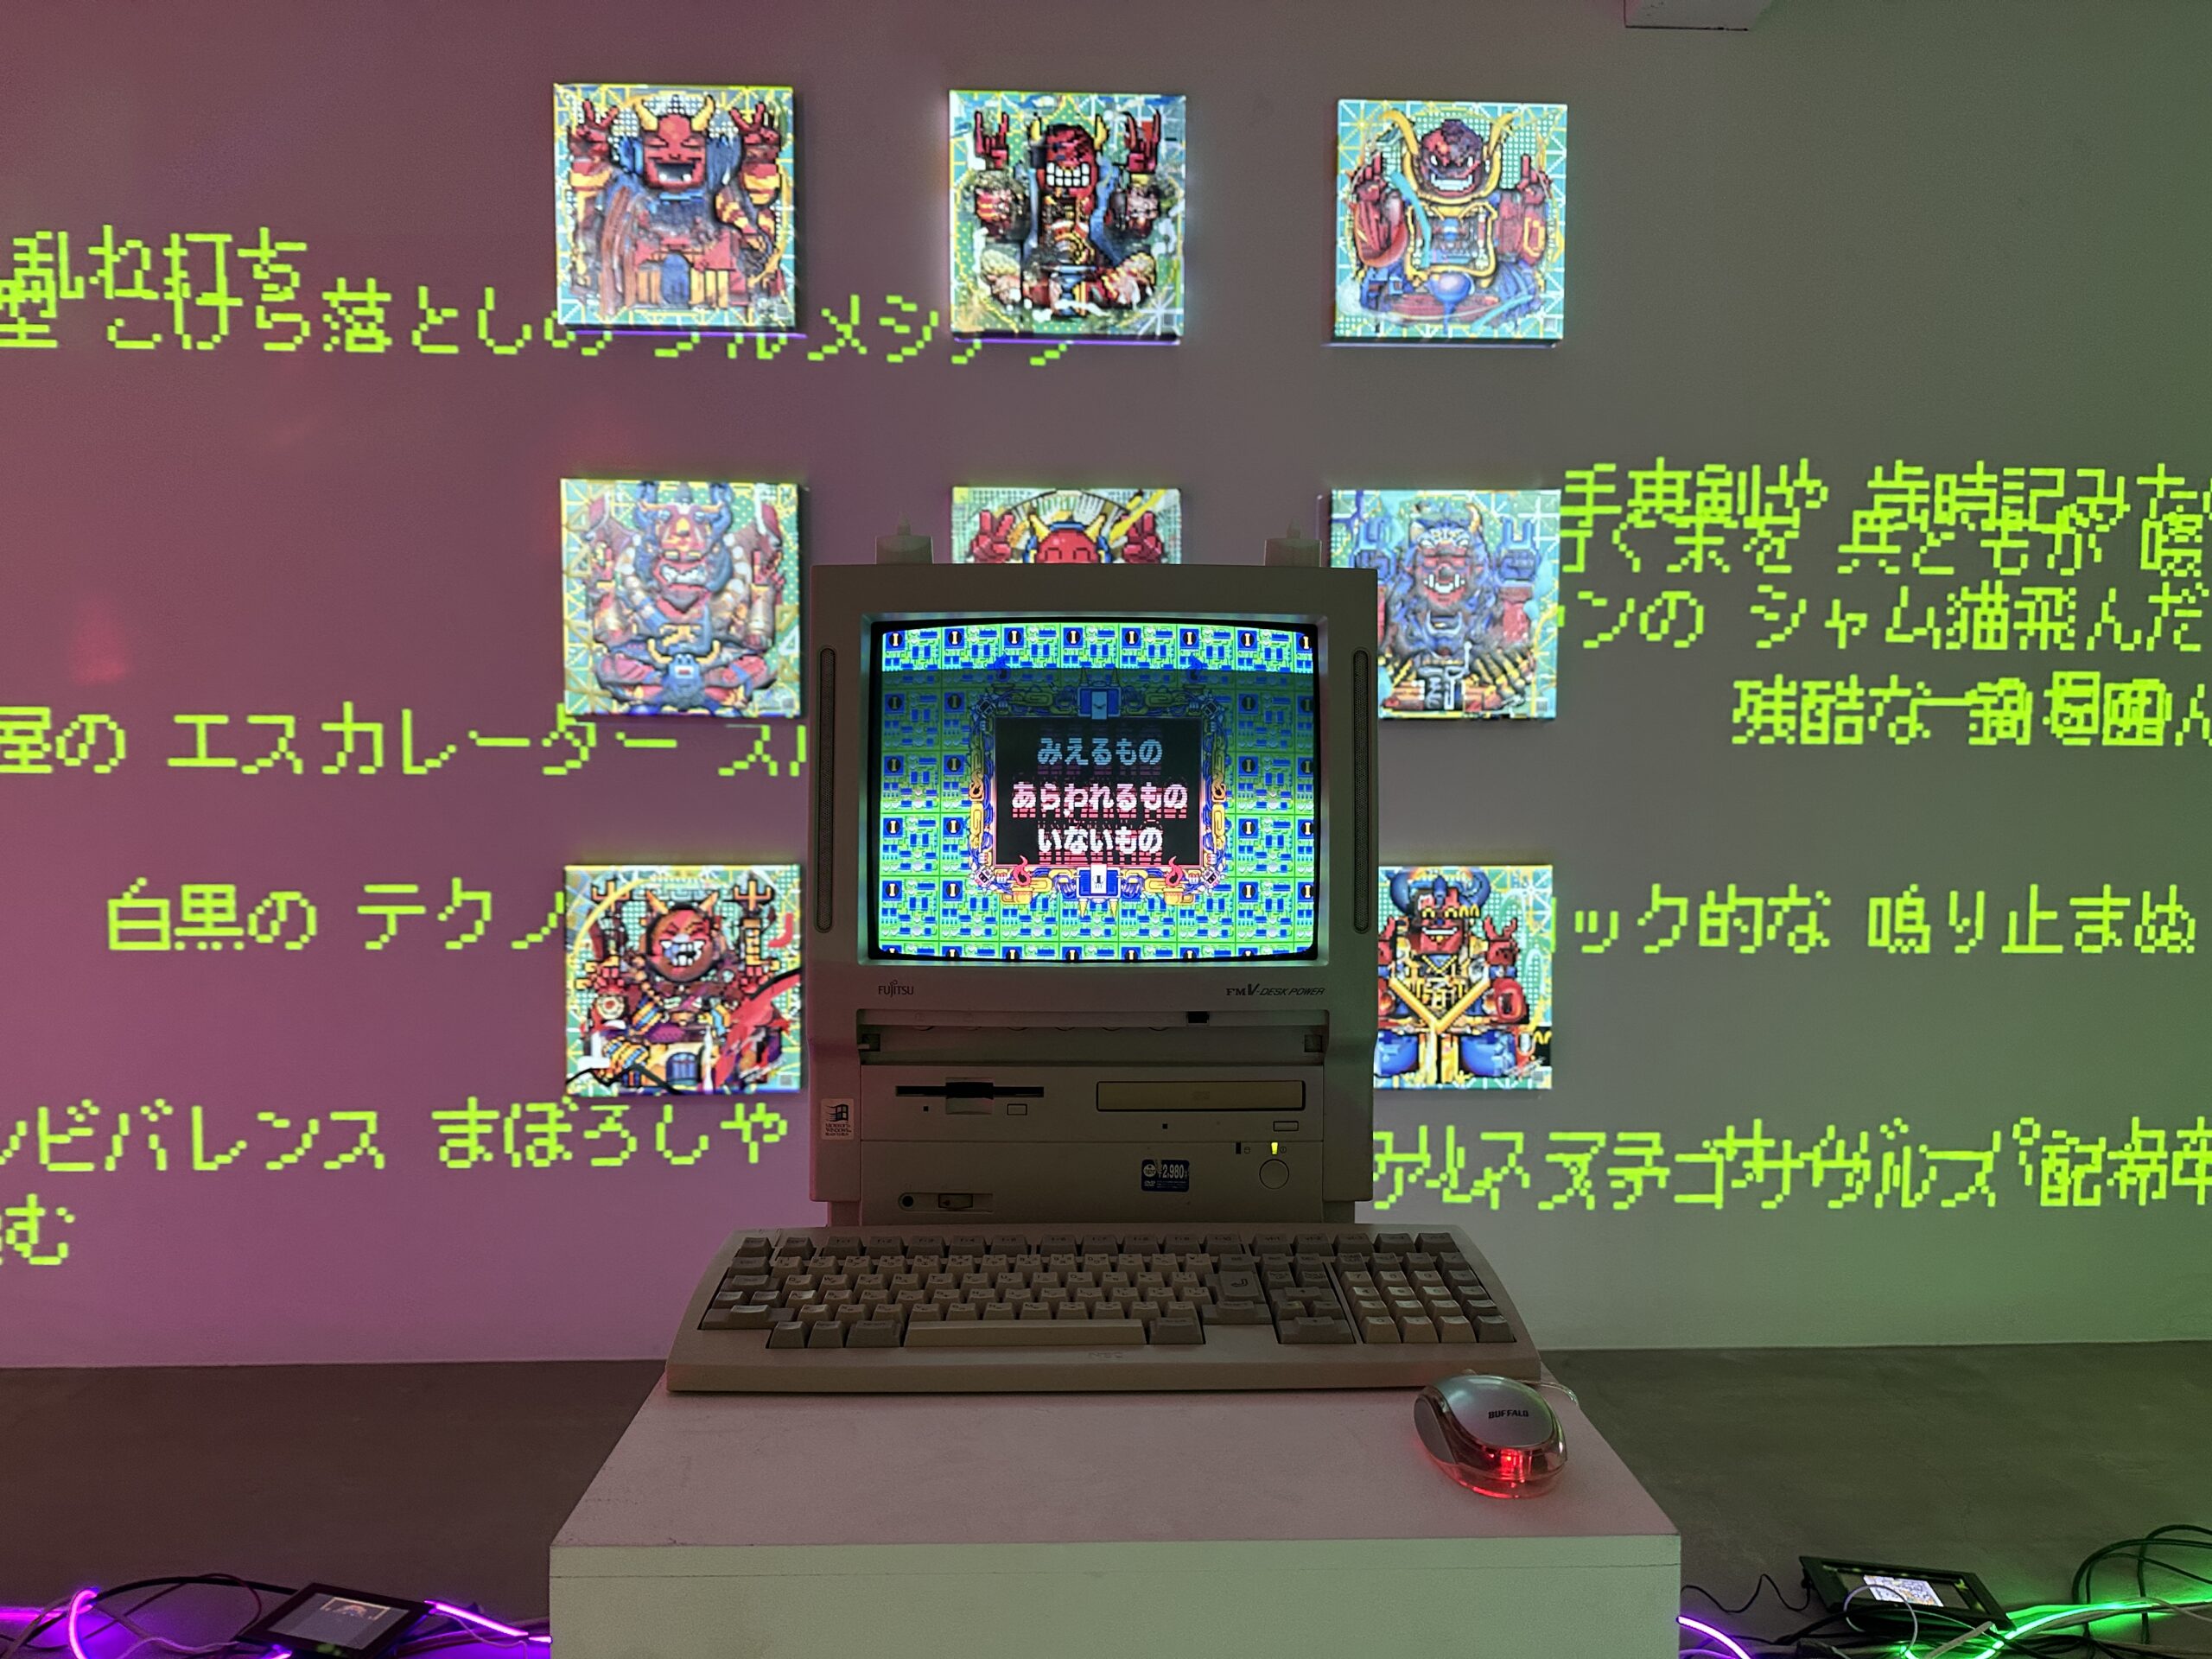 An old computer sits on a plinth in a gallery. Its screen displays 8-bit art with writing in Japanese; behind it, Japenese text is projected on the wall with green light, overlapping in places with prints of pixel art depicting folkloric creatures